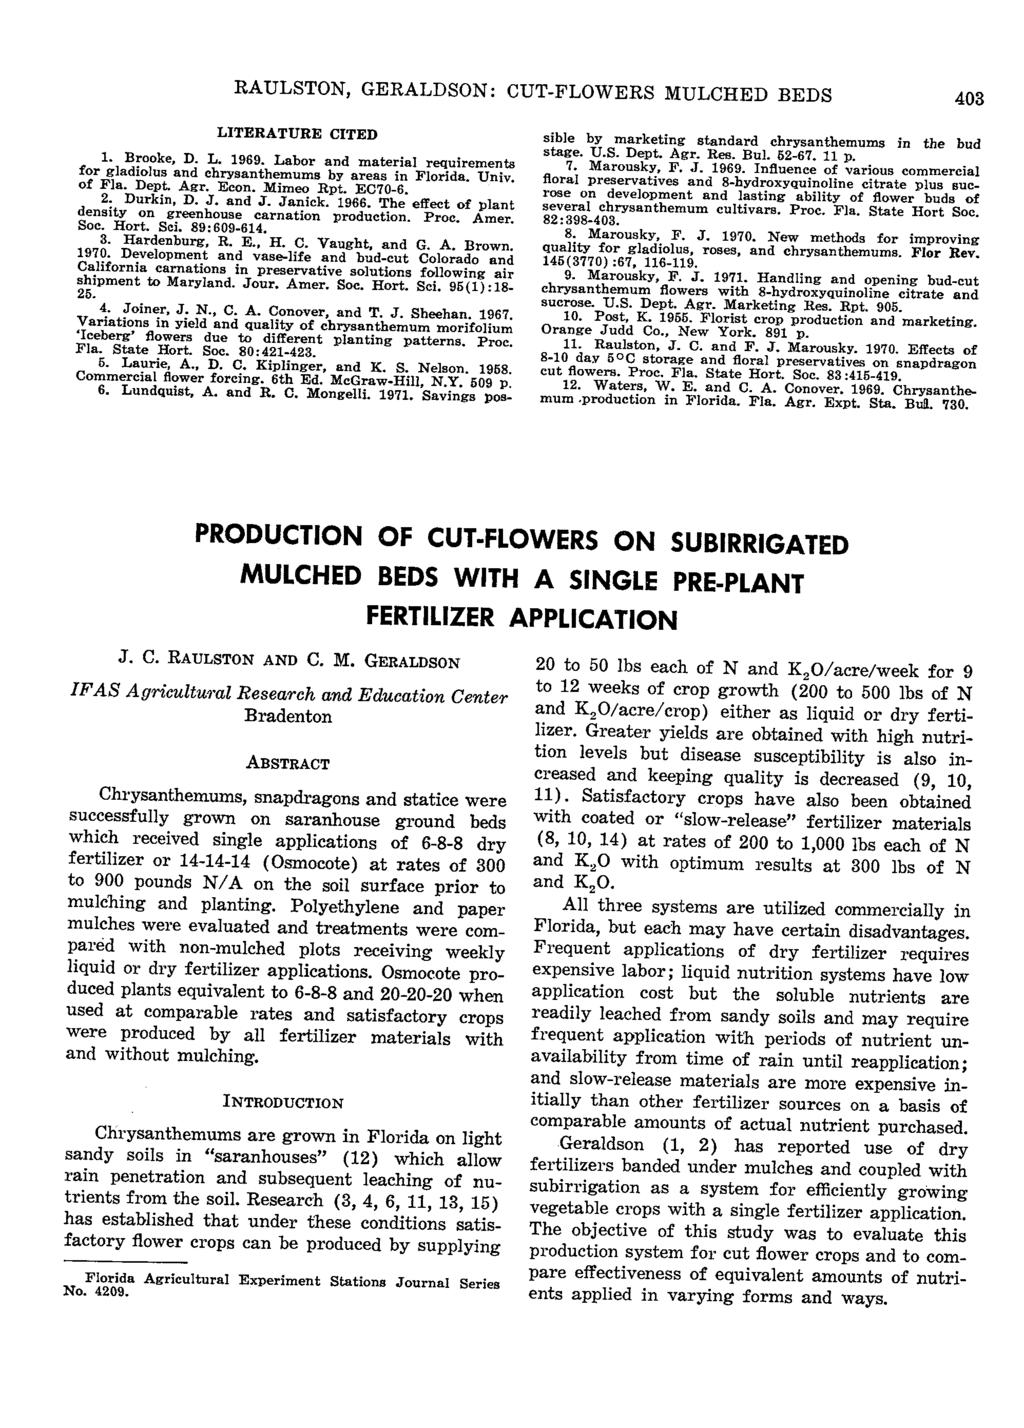 RAULSTON, GERALDSON: CUT-FLOWERS MULCHED BEDS 403 LITERATURE CITED 1. Brooke, D. L. 1969. Labor and material requirements for gladiolus and chrysanthemums by areas in Florida Univ of Fla. Dept. Agr.